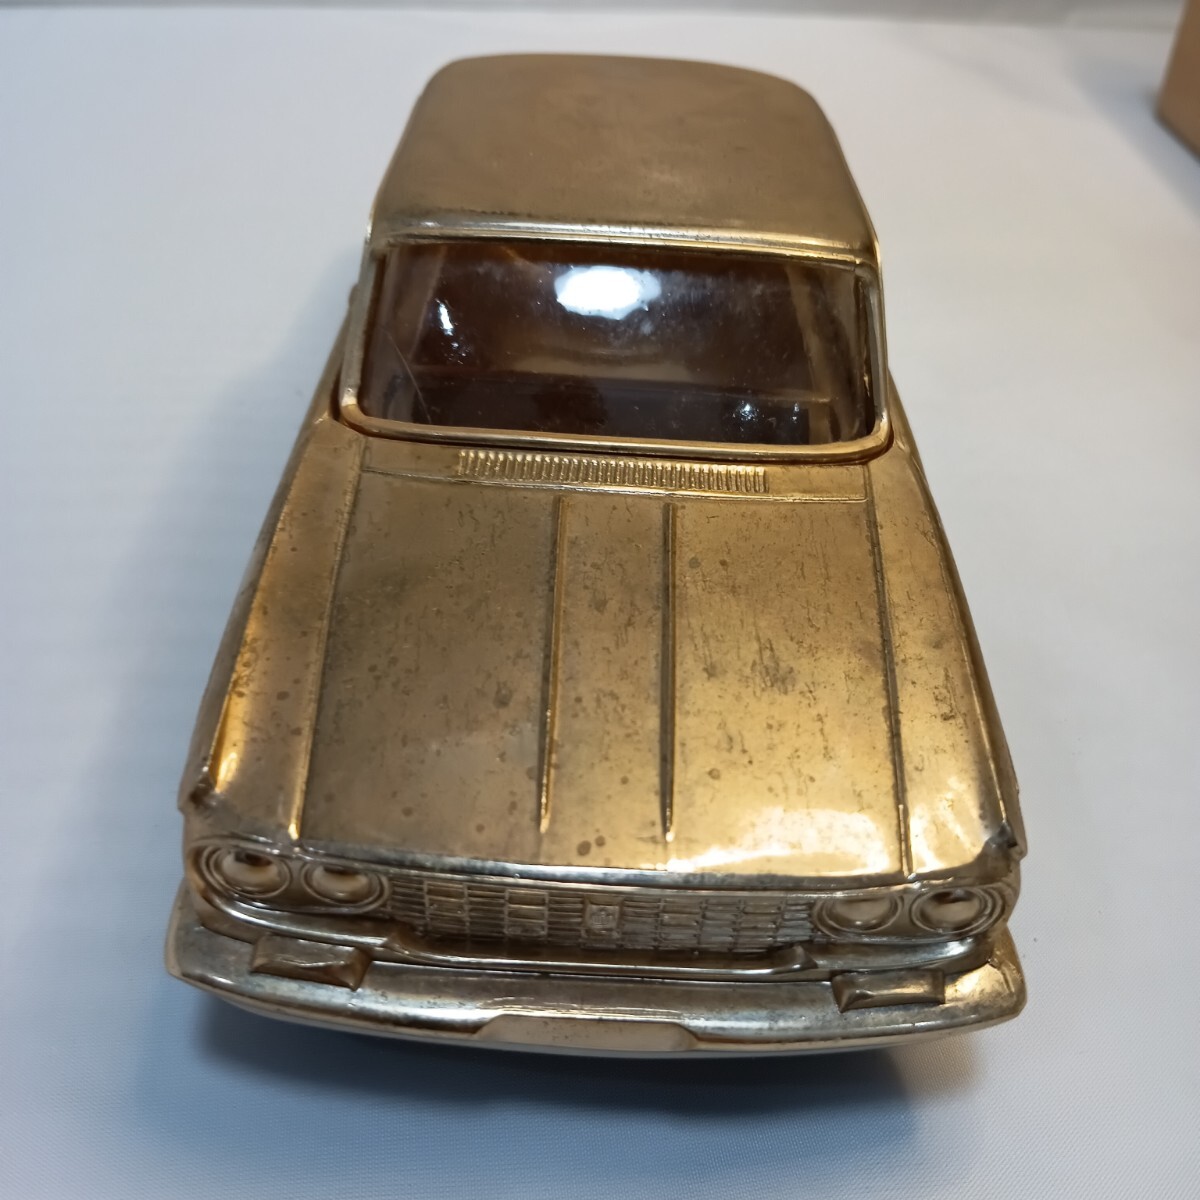  Toyota Toyopet [ Crown Deluxe ] made of metal cigarette case original box have beautiful goods Showa Retro 